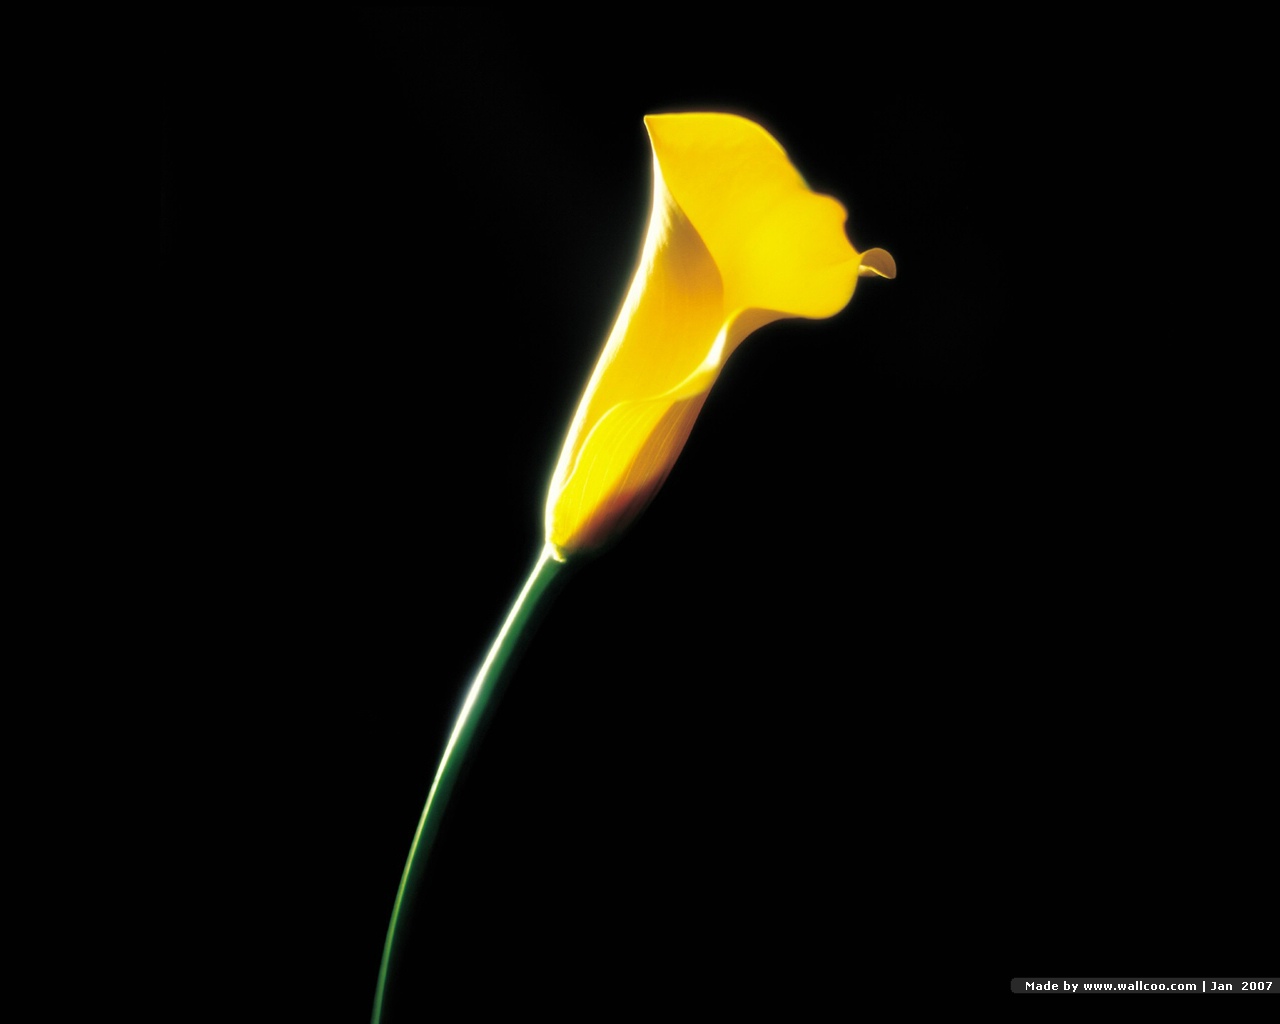 Calla Lily In Dark Is A Great Wallpaper For Your Puter Desktop